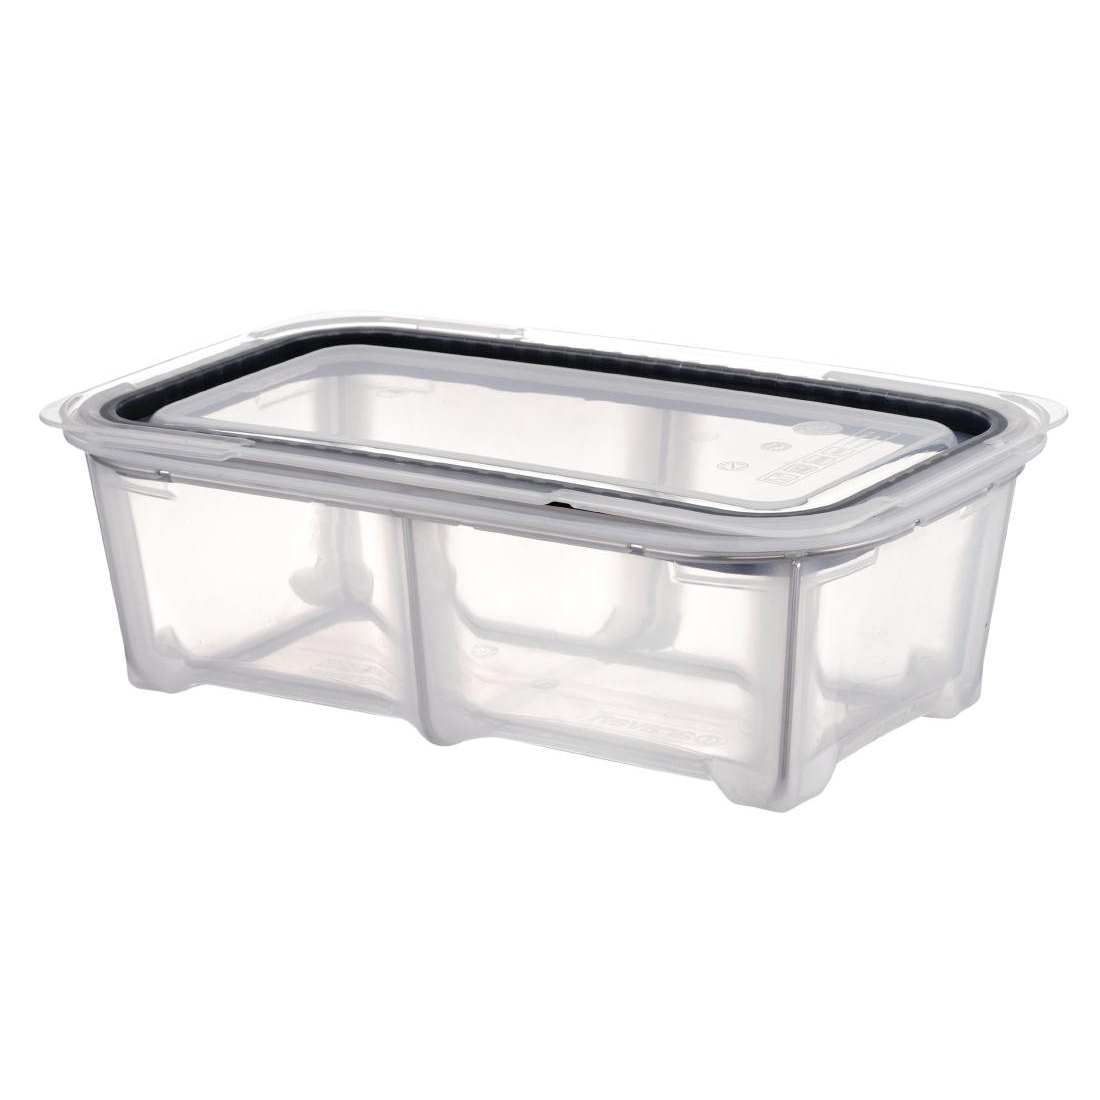 AraveN 1/3 GN Silicone Gastronorm Food Container 4L